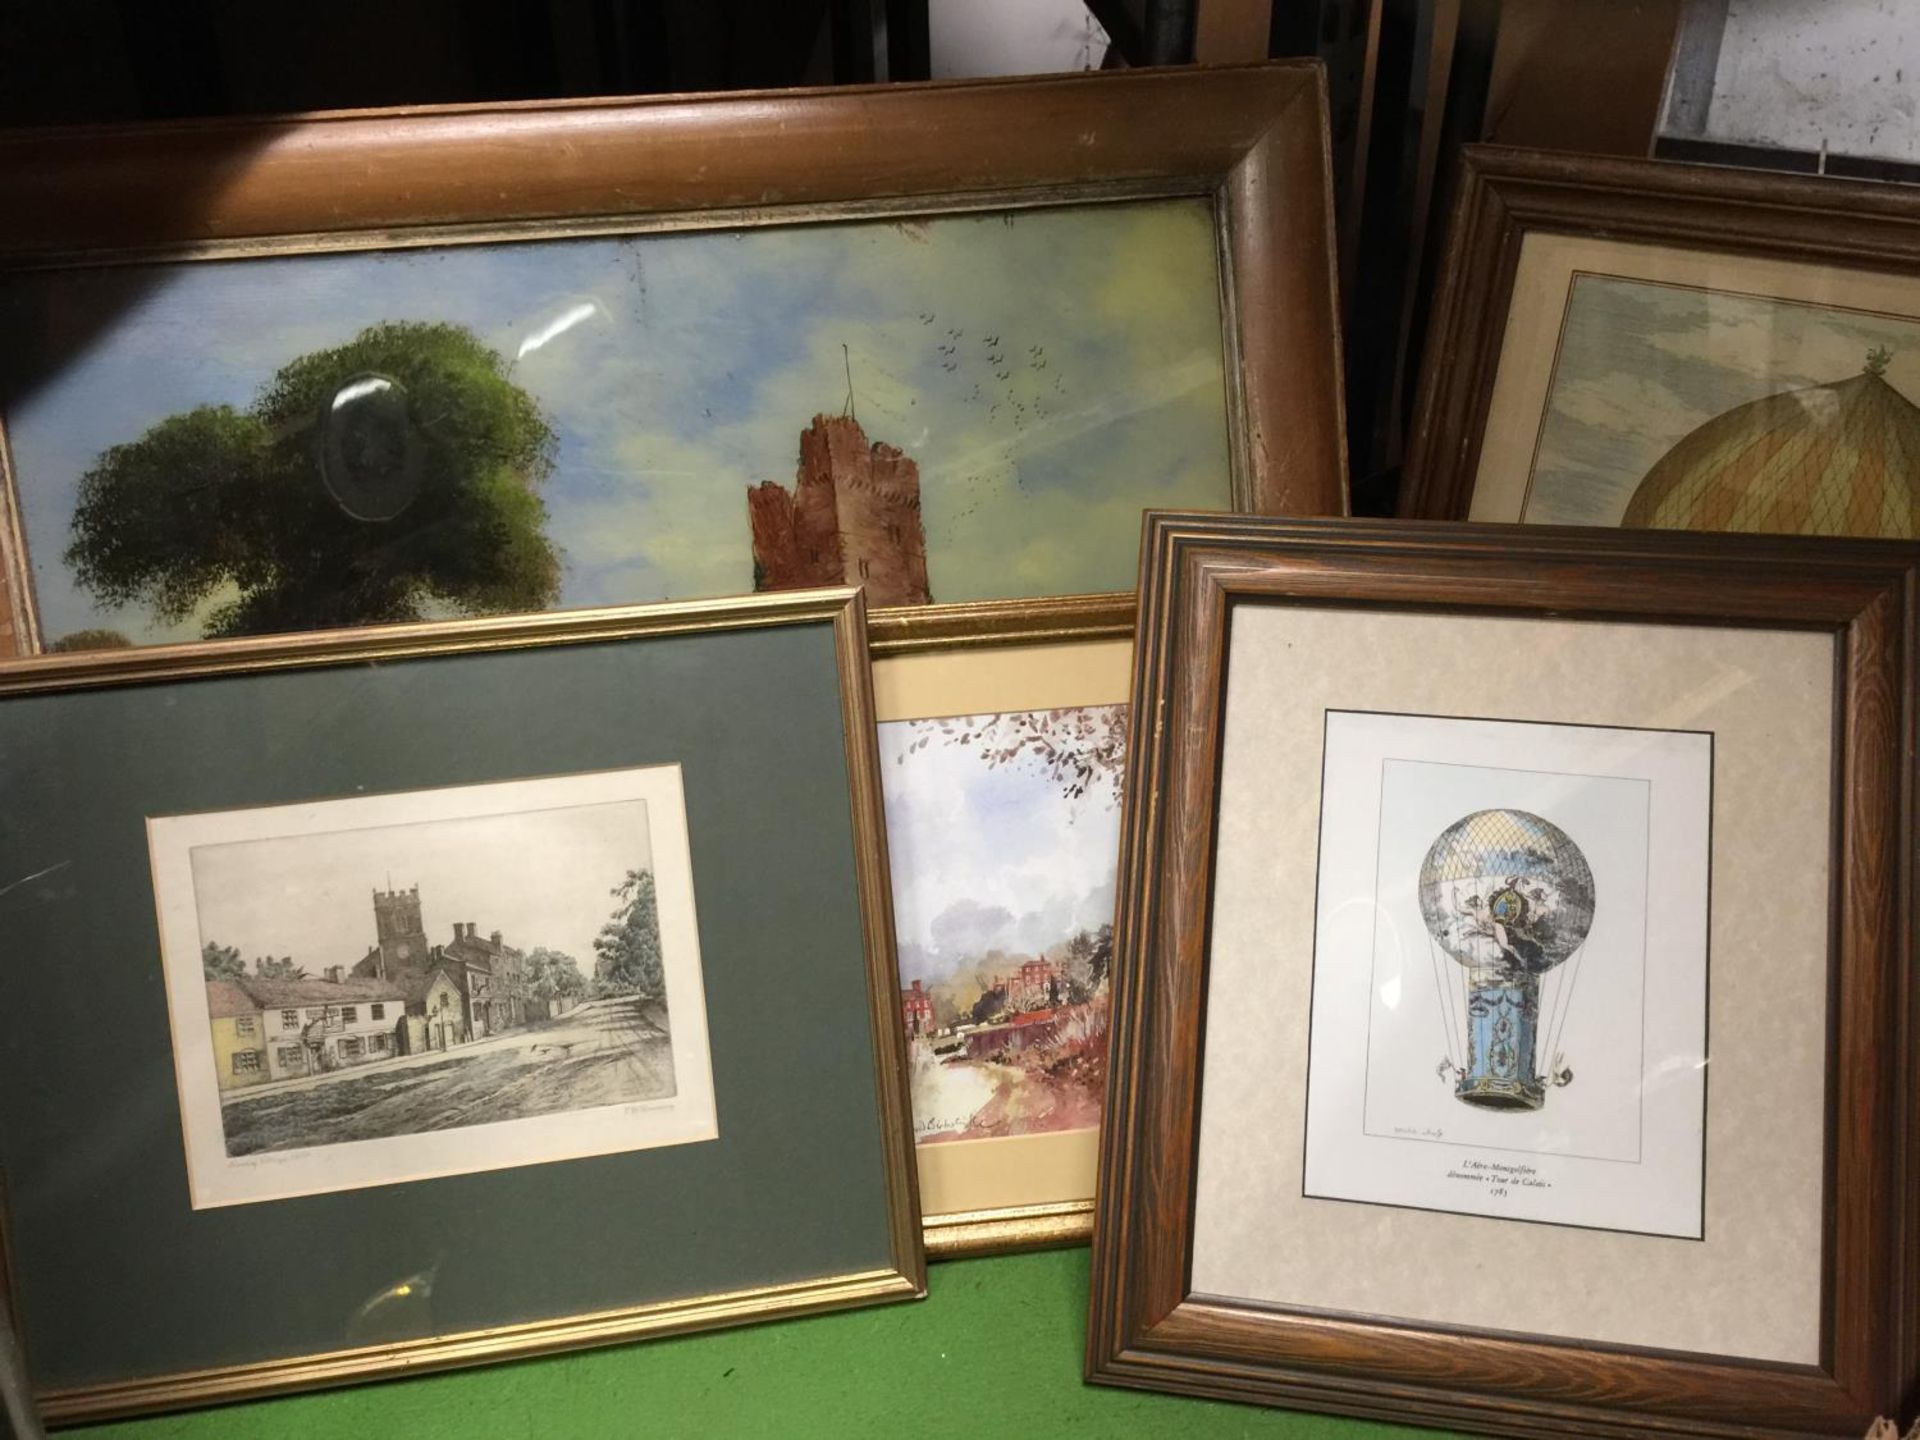 A FRAMED PAINTING OF A CASTLE ON GLASS, TWO FRAMED BALLOON PRINTS, A STREET SCENE AND A CHURCH - Image 2 of 2